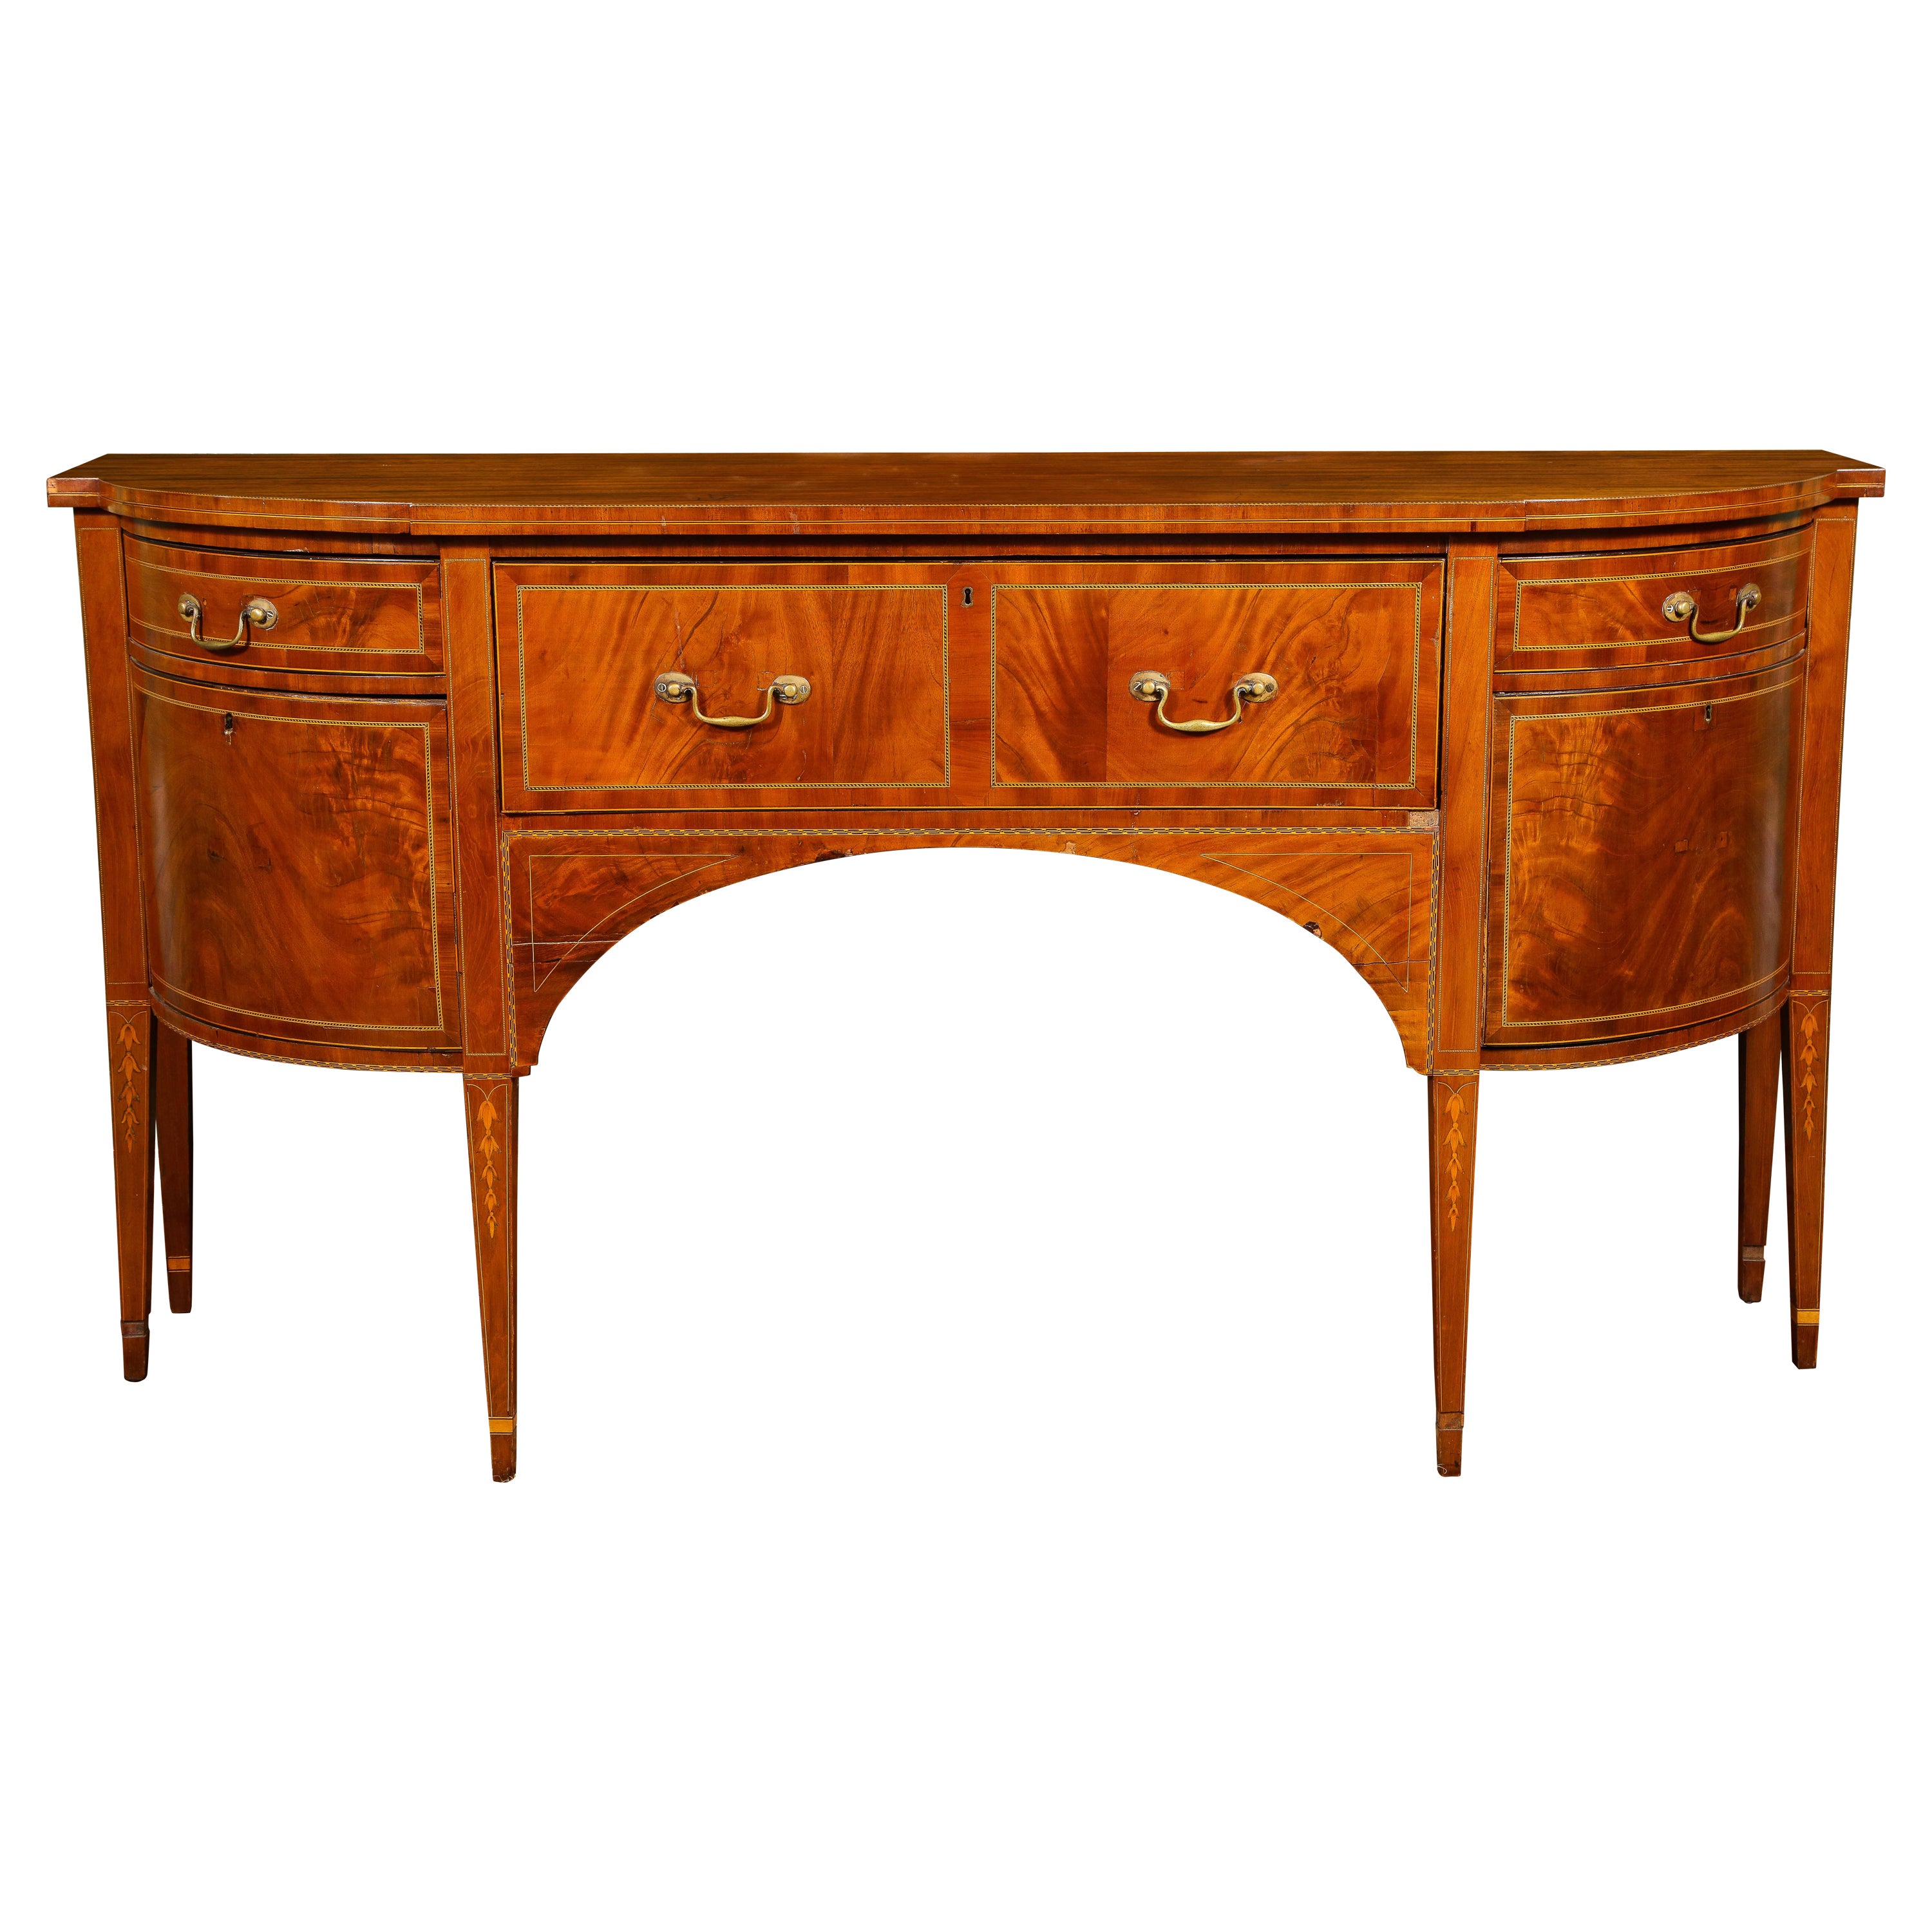 19th Century George III Style Parquetry Inlaid Bowfront Mahogany Buffet For Sale